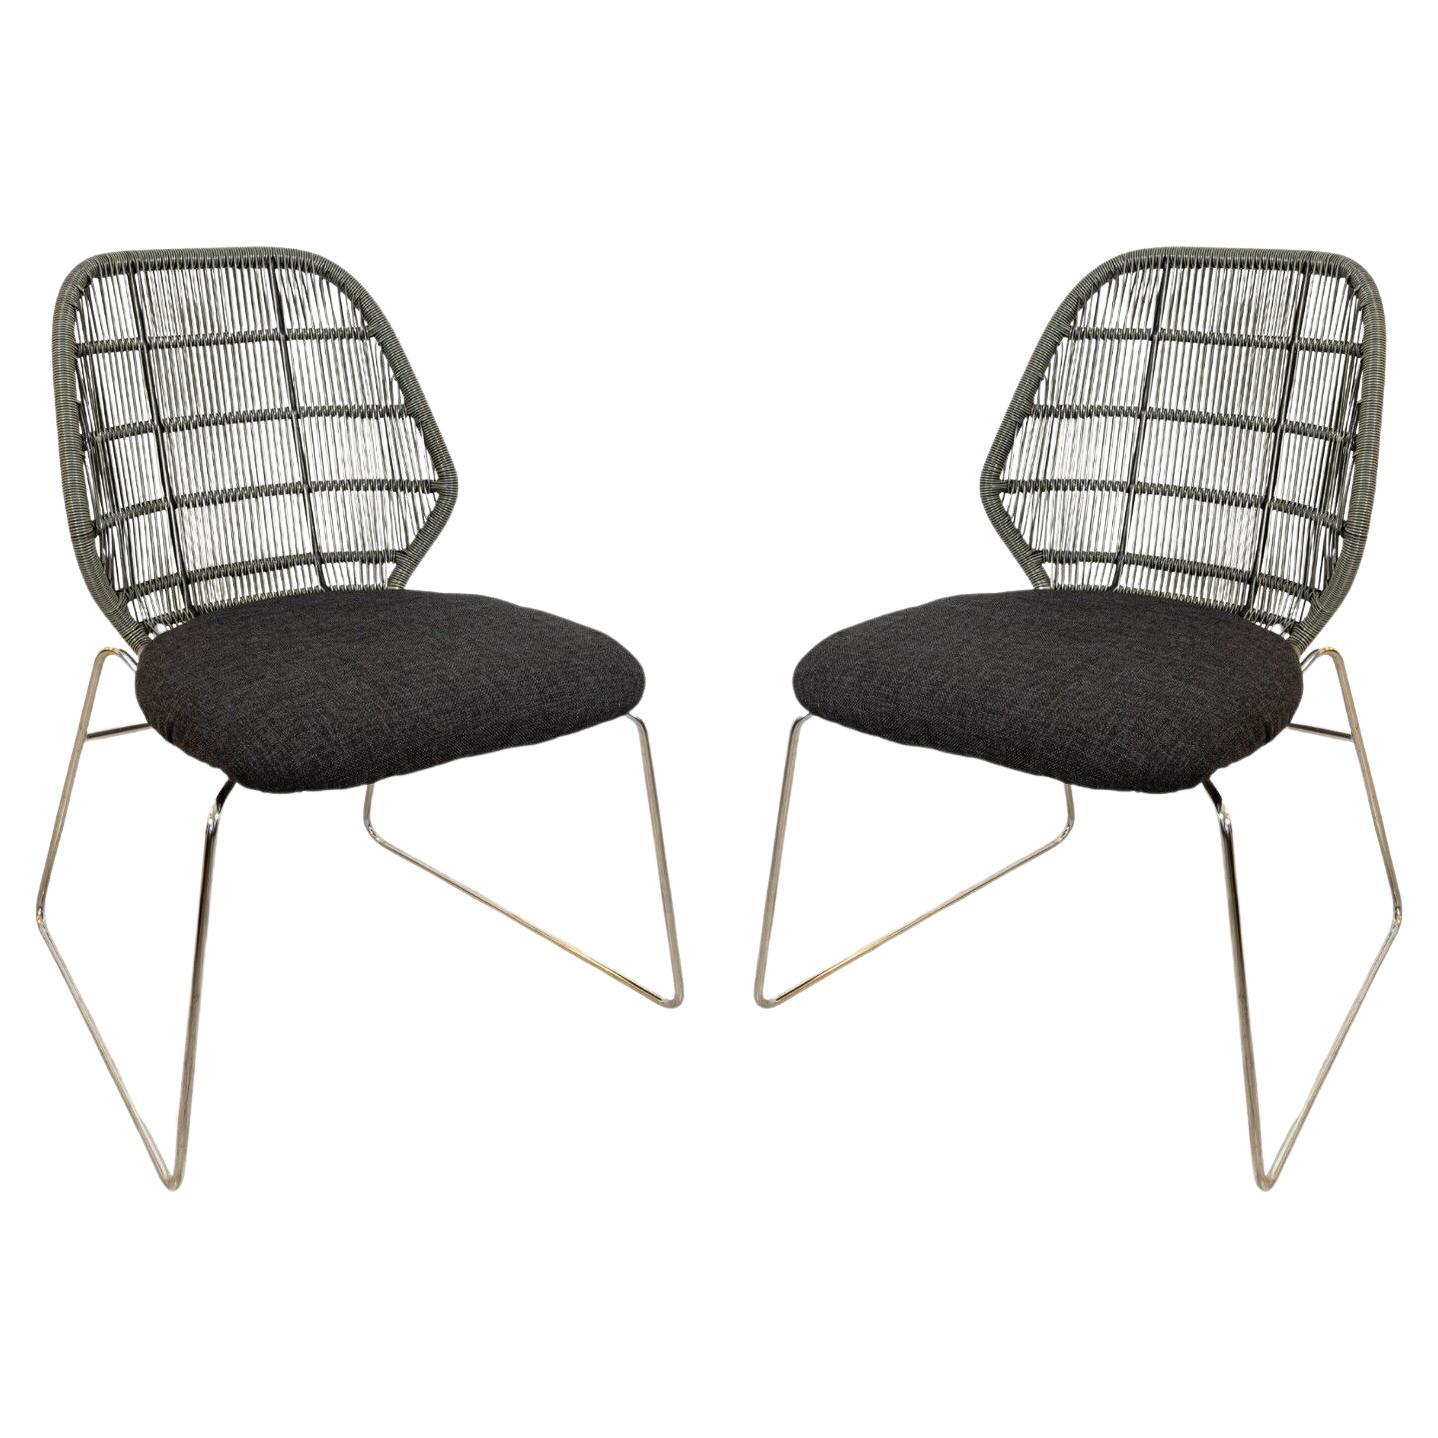 Pair of B&B Italia Contemporary Modern Crinoline and Stainless Steel Chairs For Sale